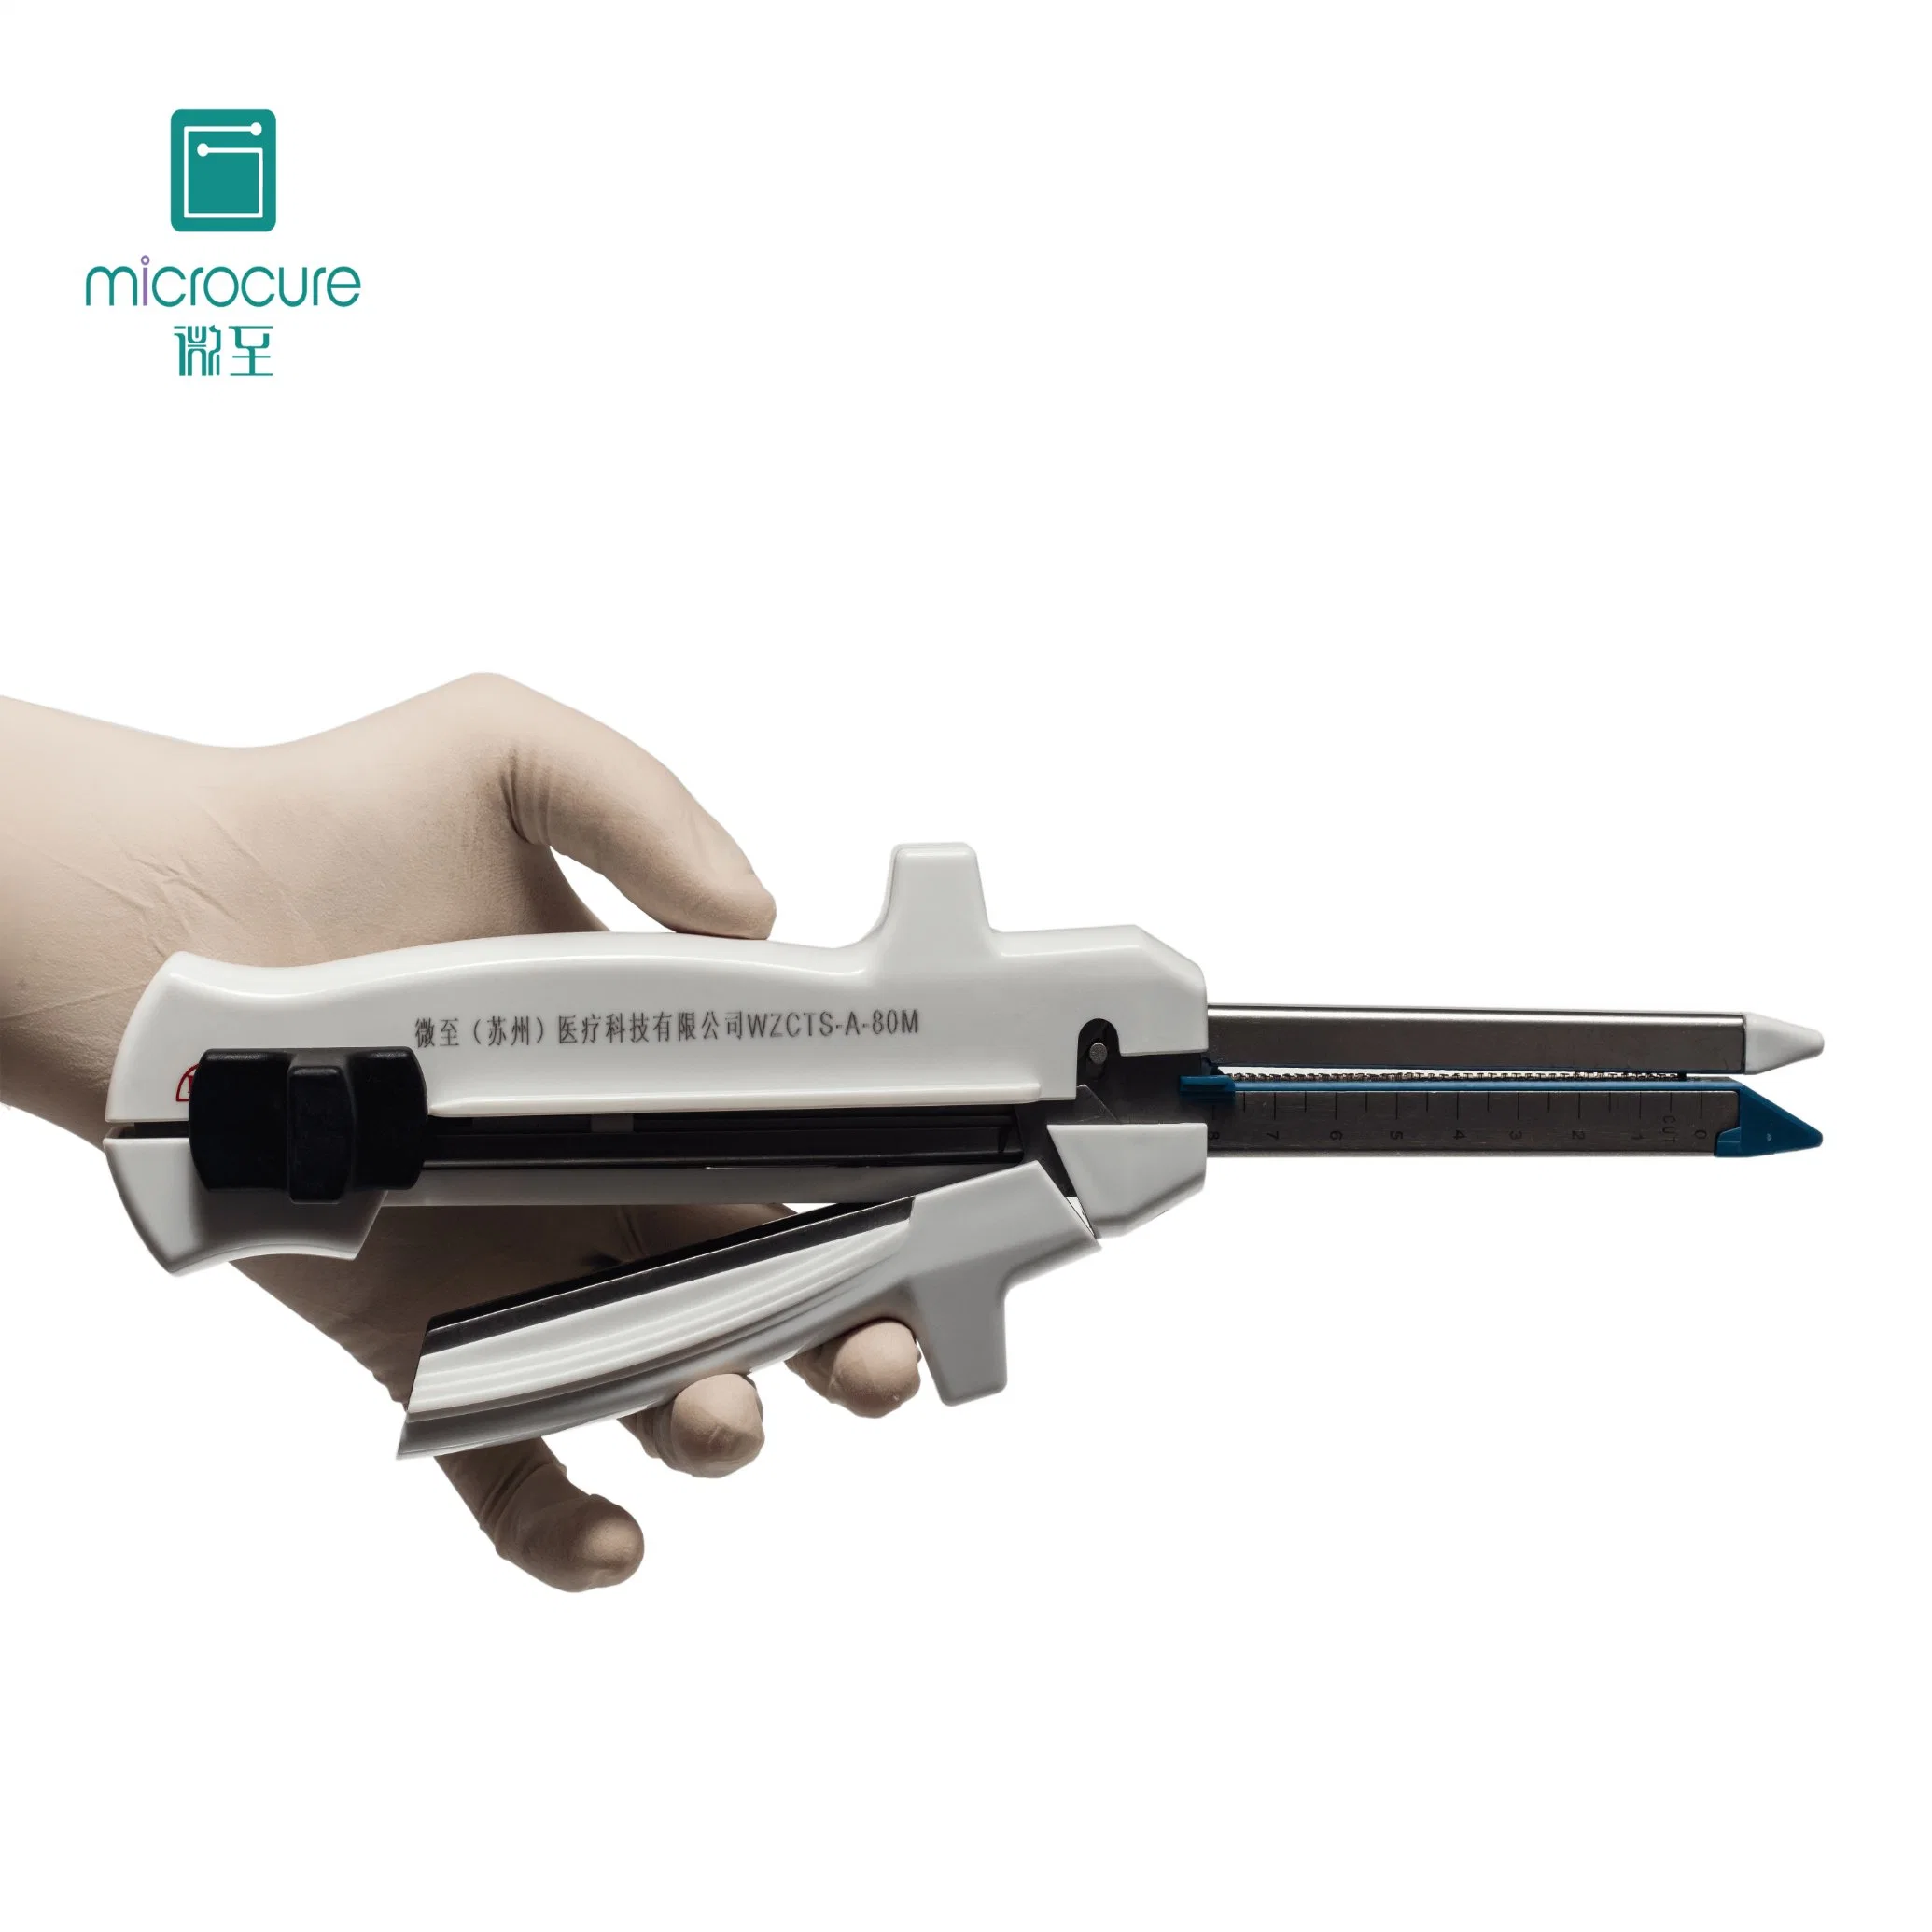 Disposable Surgical Instrument with Ease Reloadable Linear Cutter Stapler